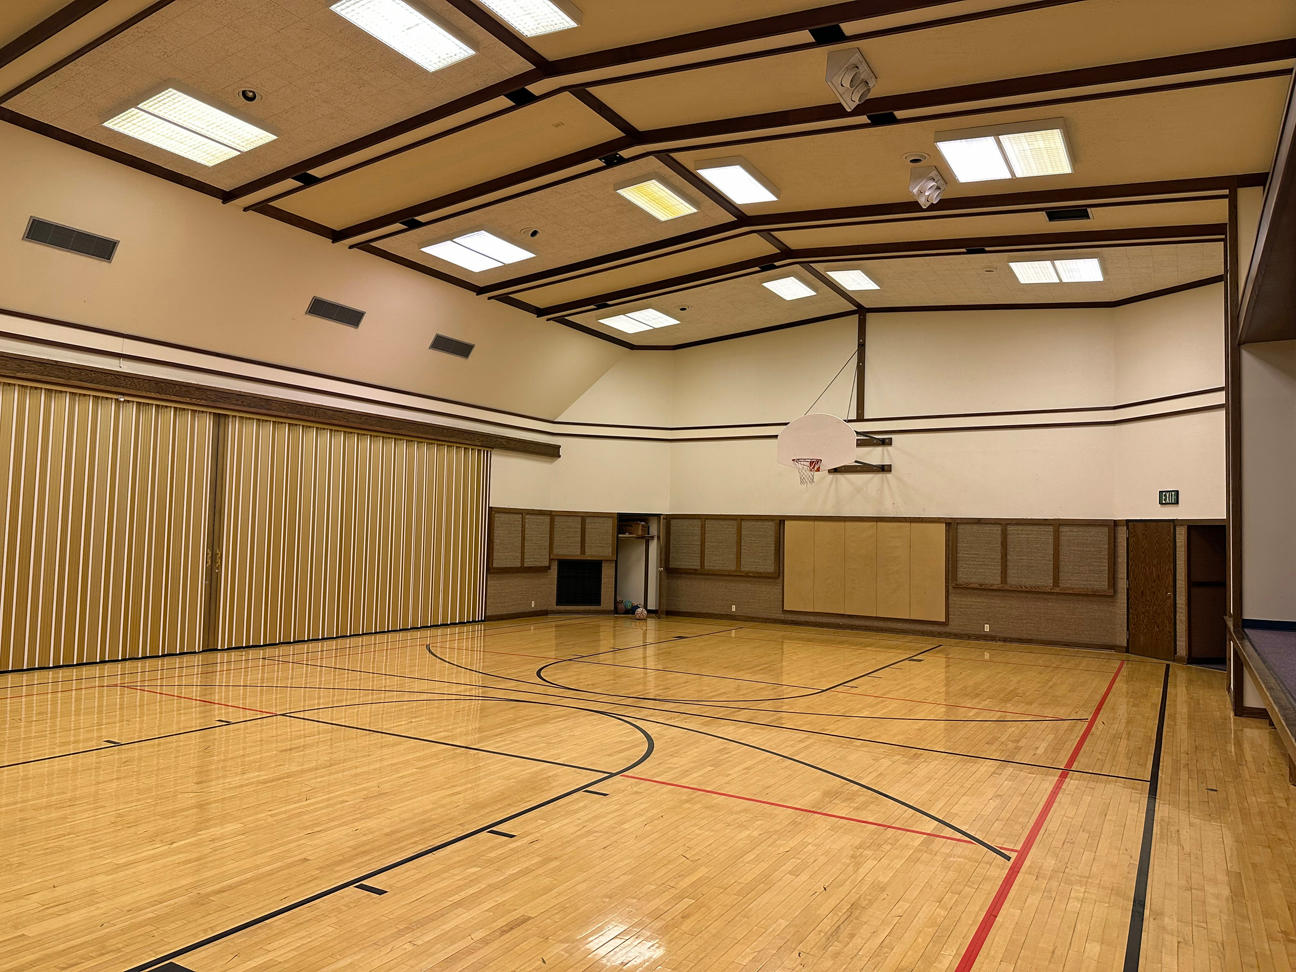 Gym for Youth Activities, Dinners, etc. The Church of Jesus Christ of Latter-day Saints White Salmon (509)543-0458